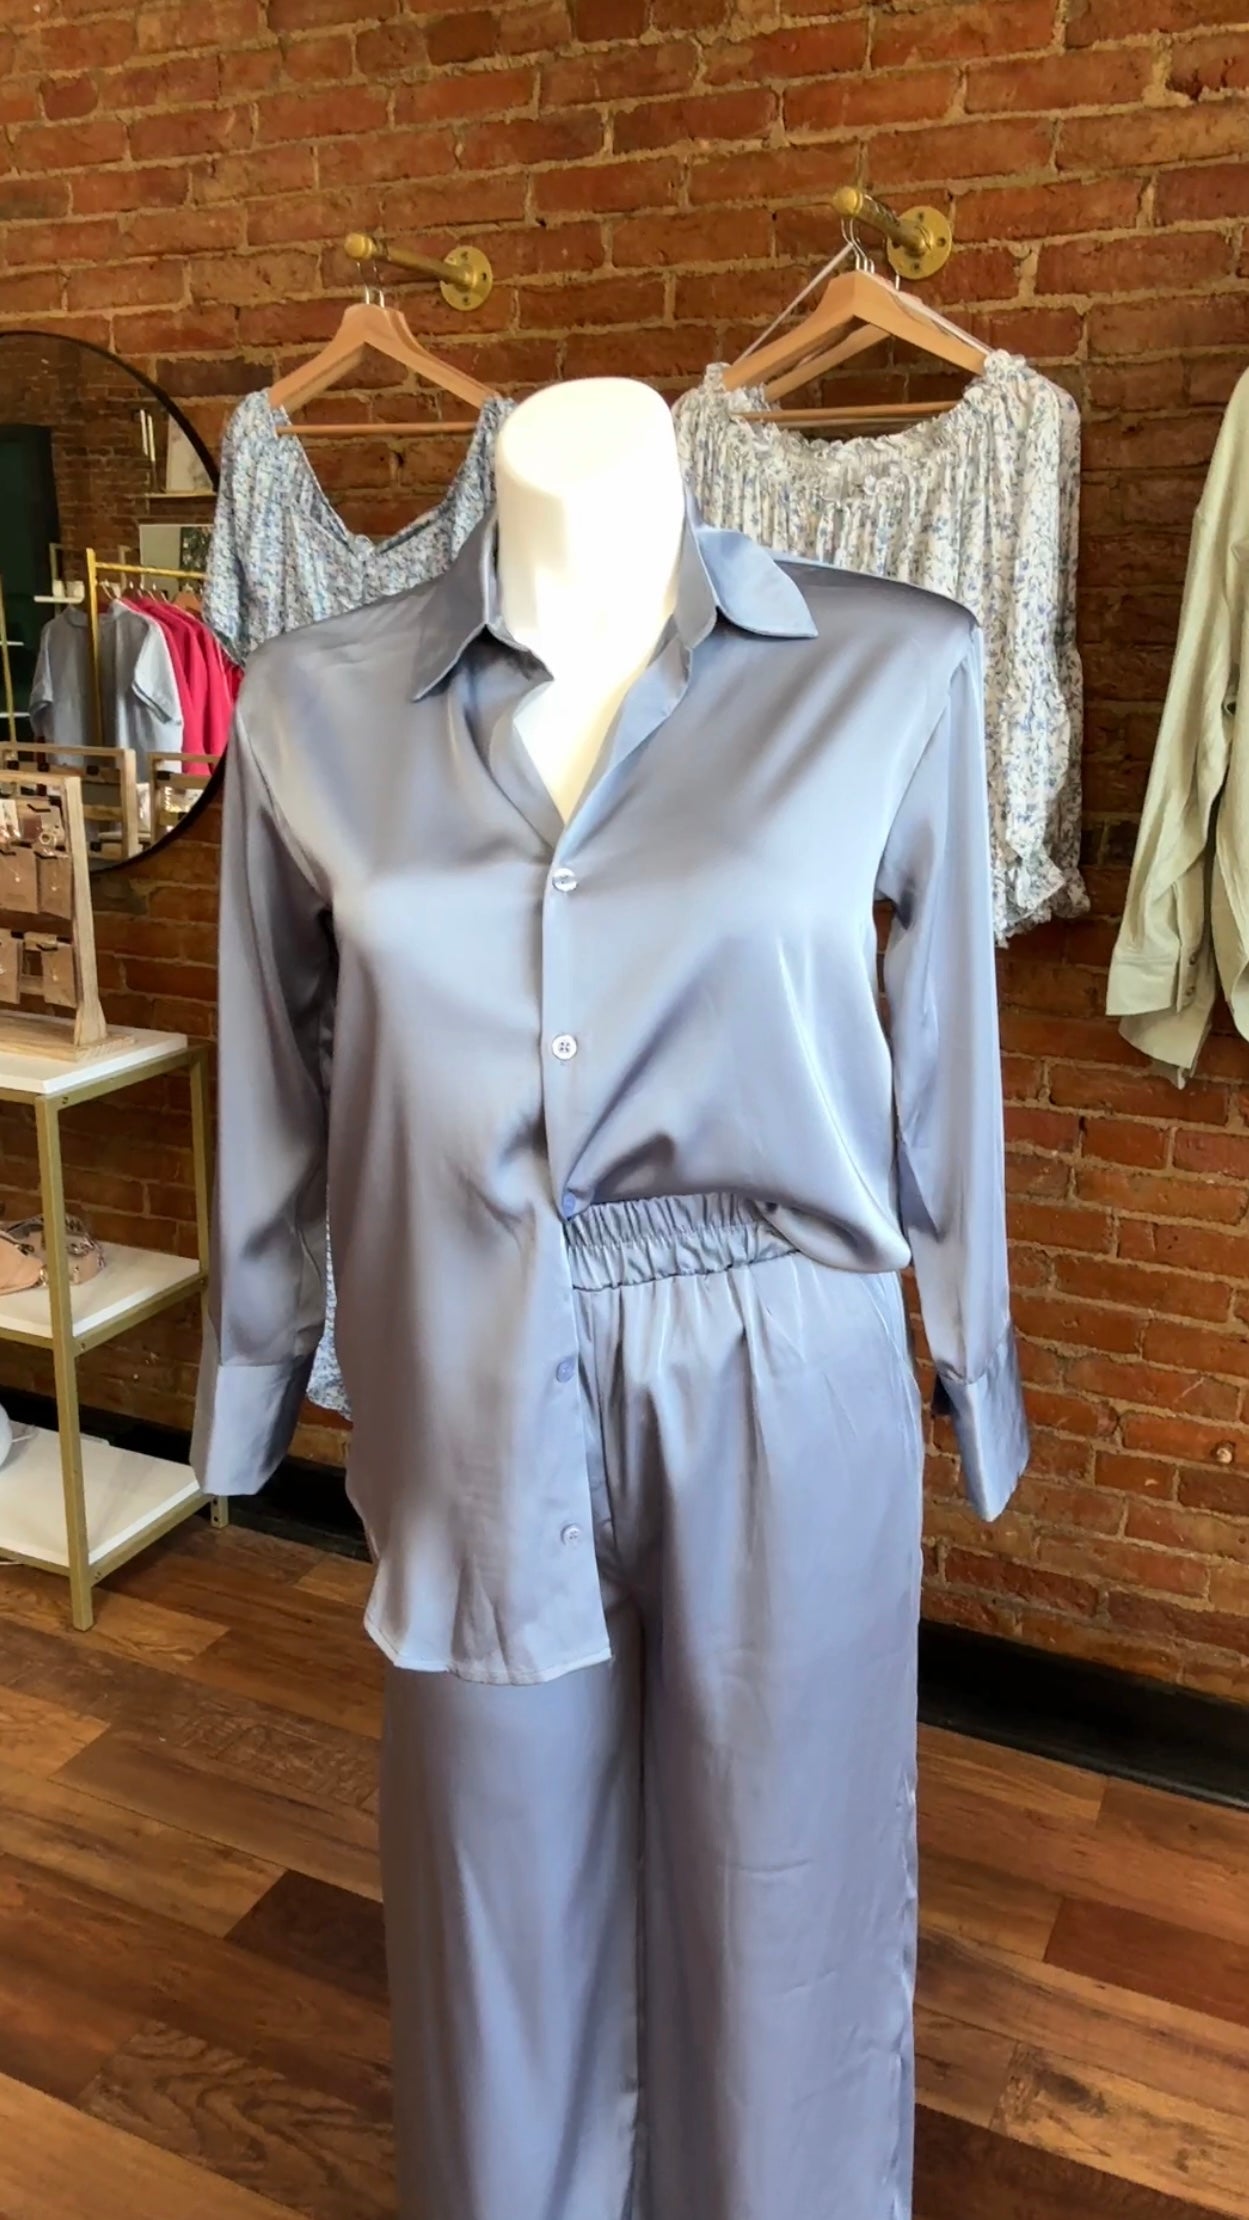 50% Off Clearance: Satin Set: Includes Button Up and Pants